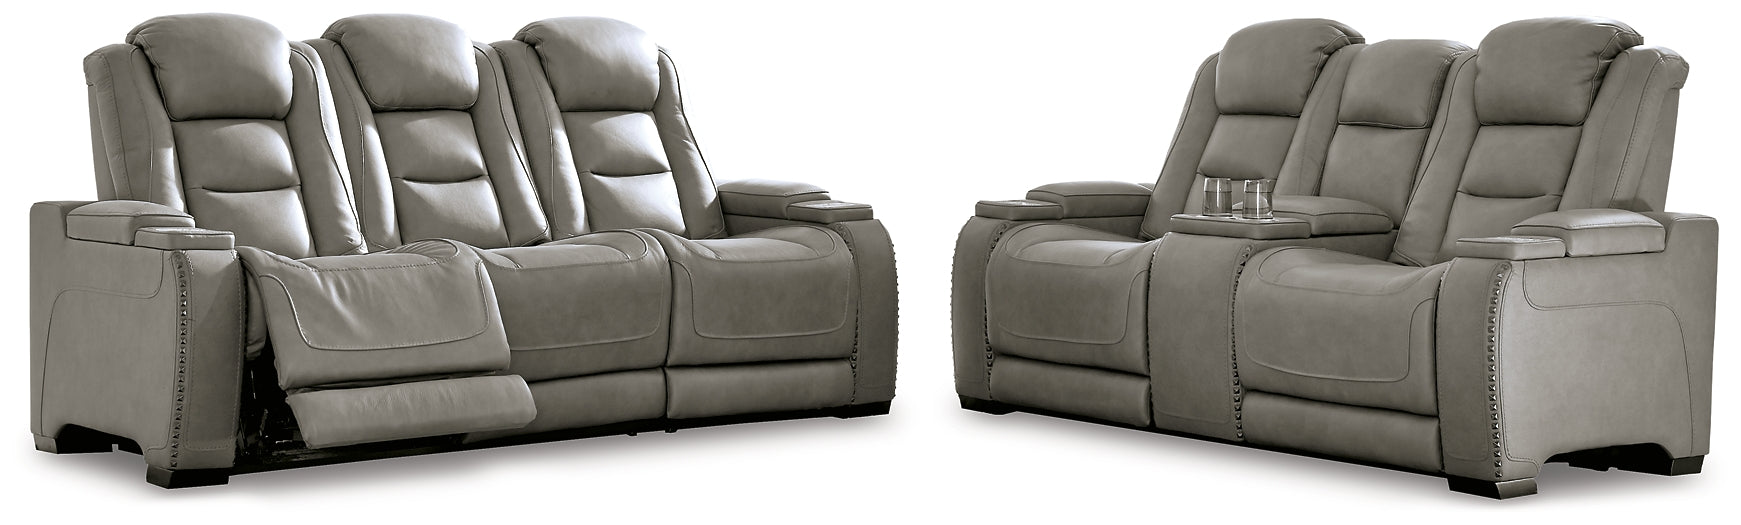 The Man-Den Sofa and Loveseat at Walker Mattress and Furniture Locations in Cedar Park and Belton TX.